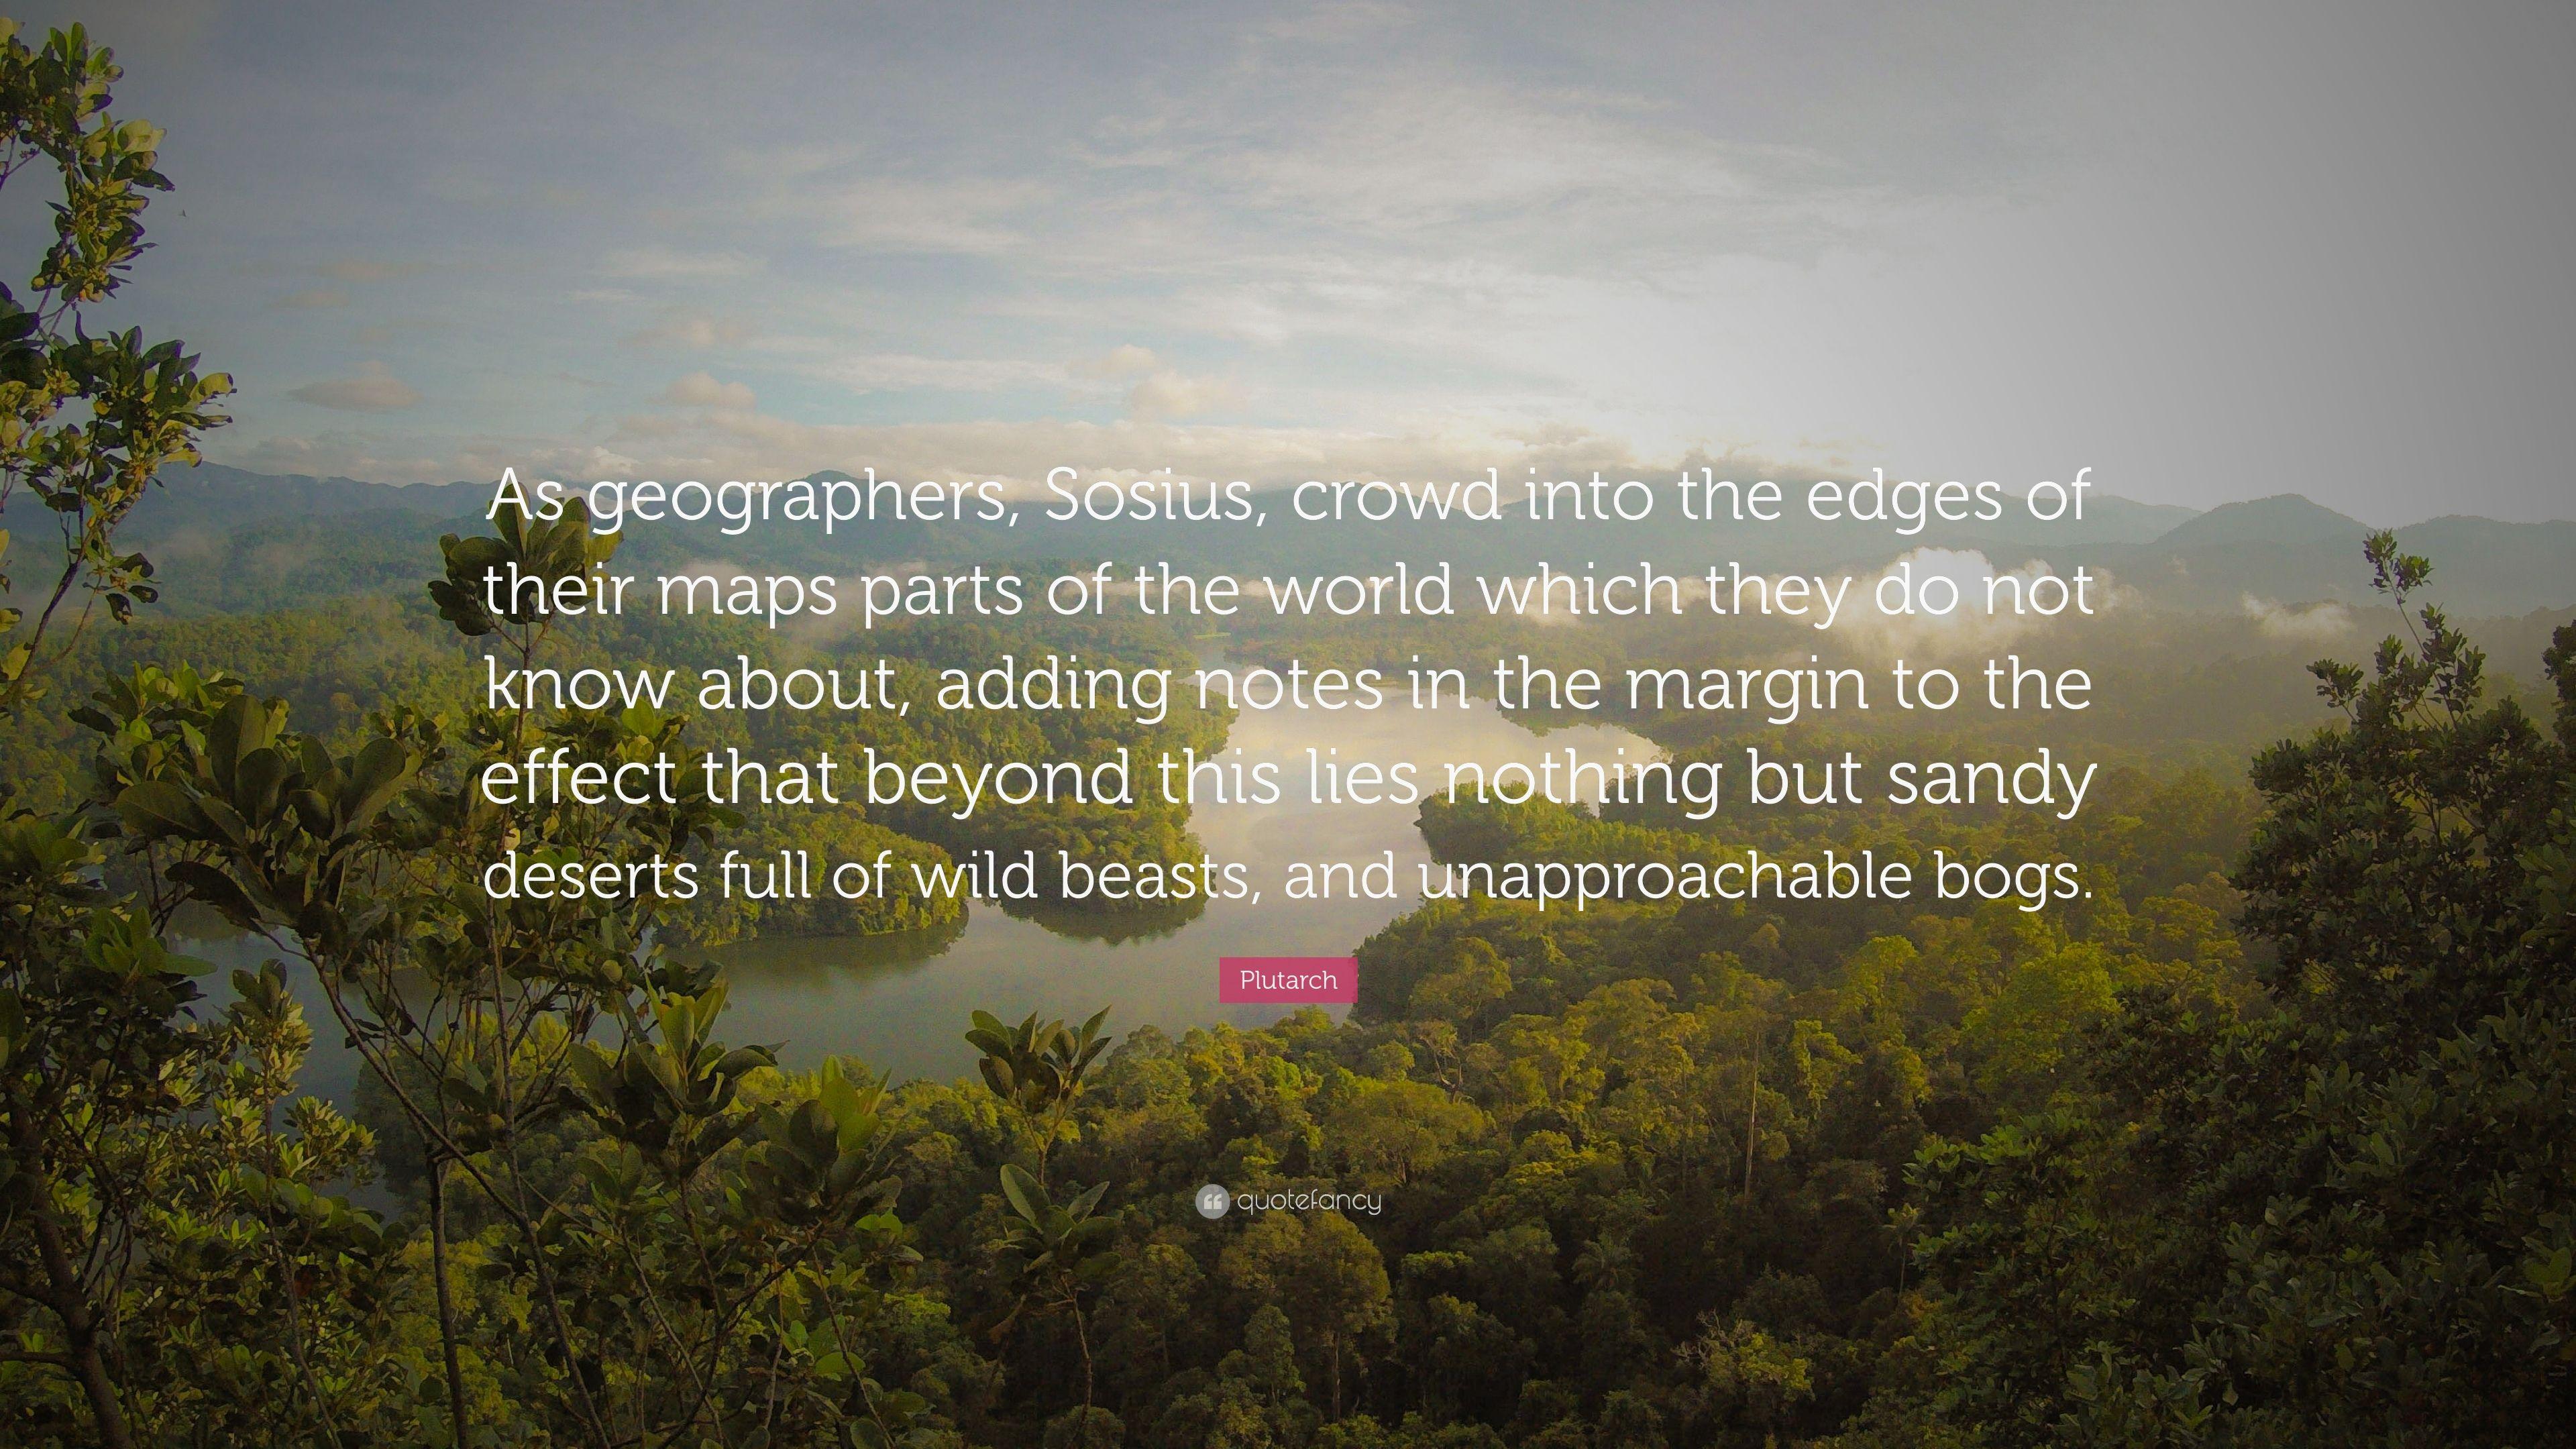 Plutarch Quote: “As geographers, Sosius, crowd into the edges